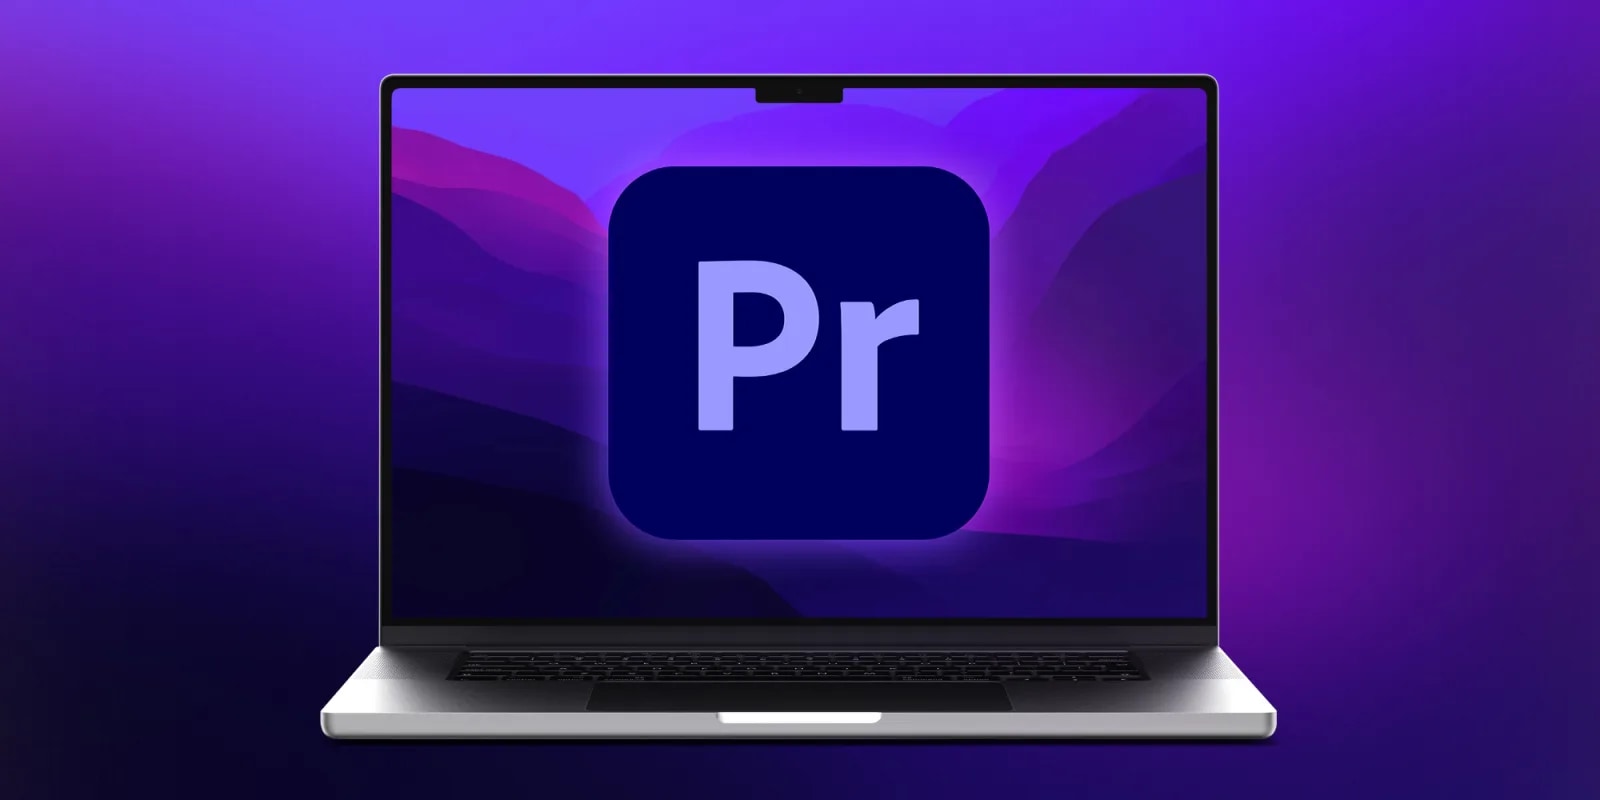 adobe premiere pro for repairing the videos